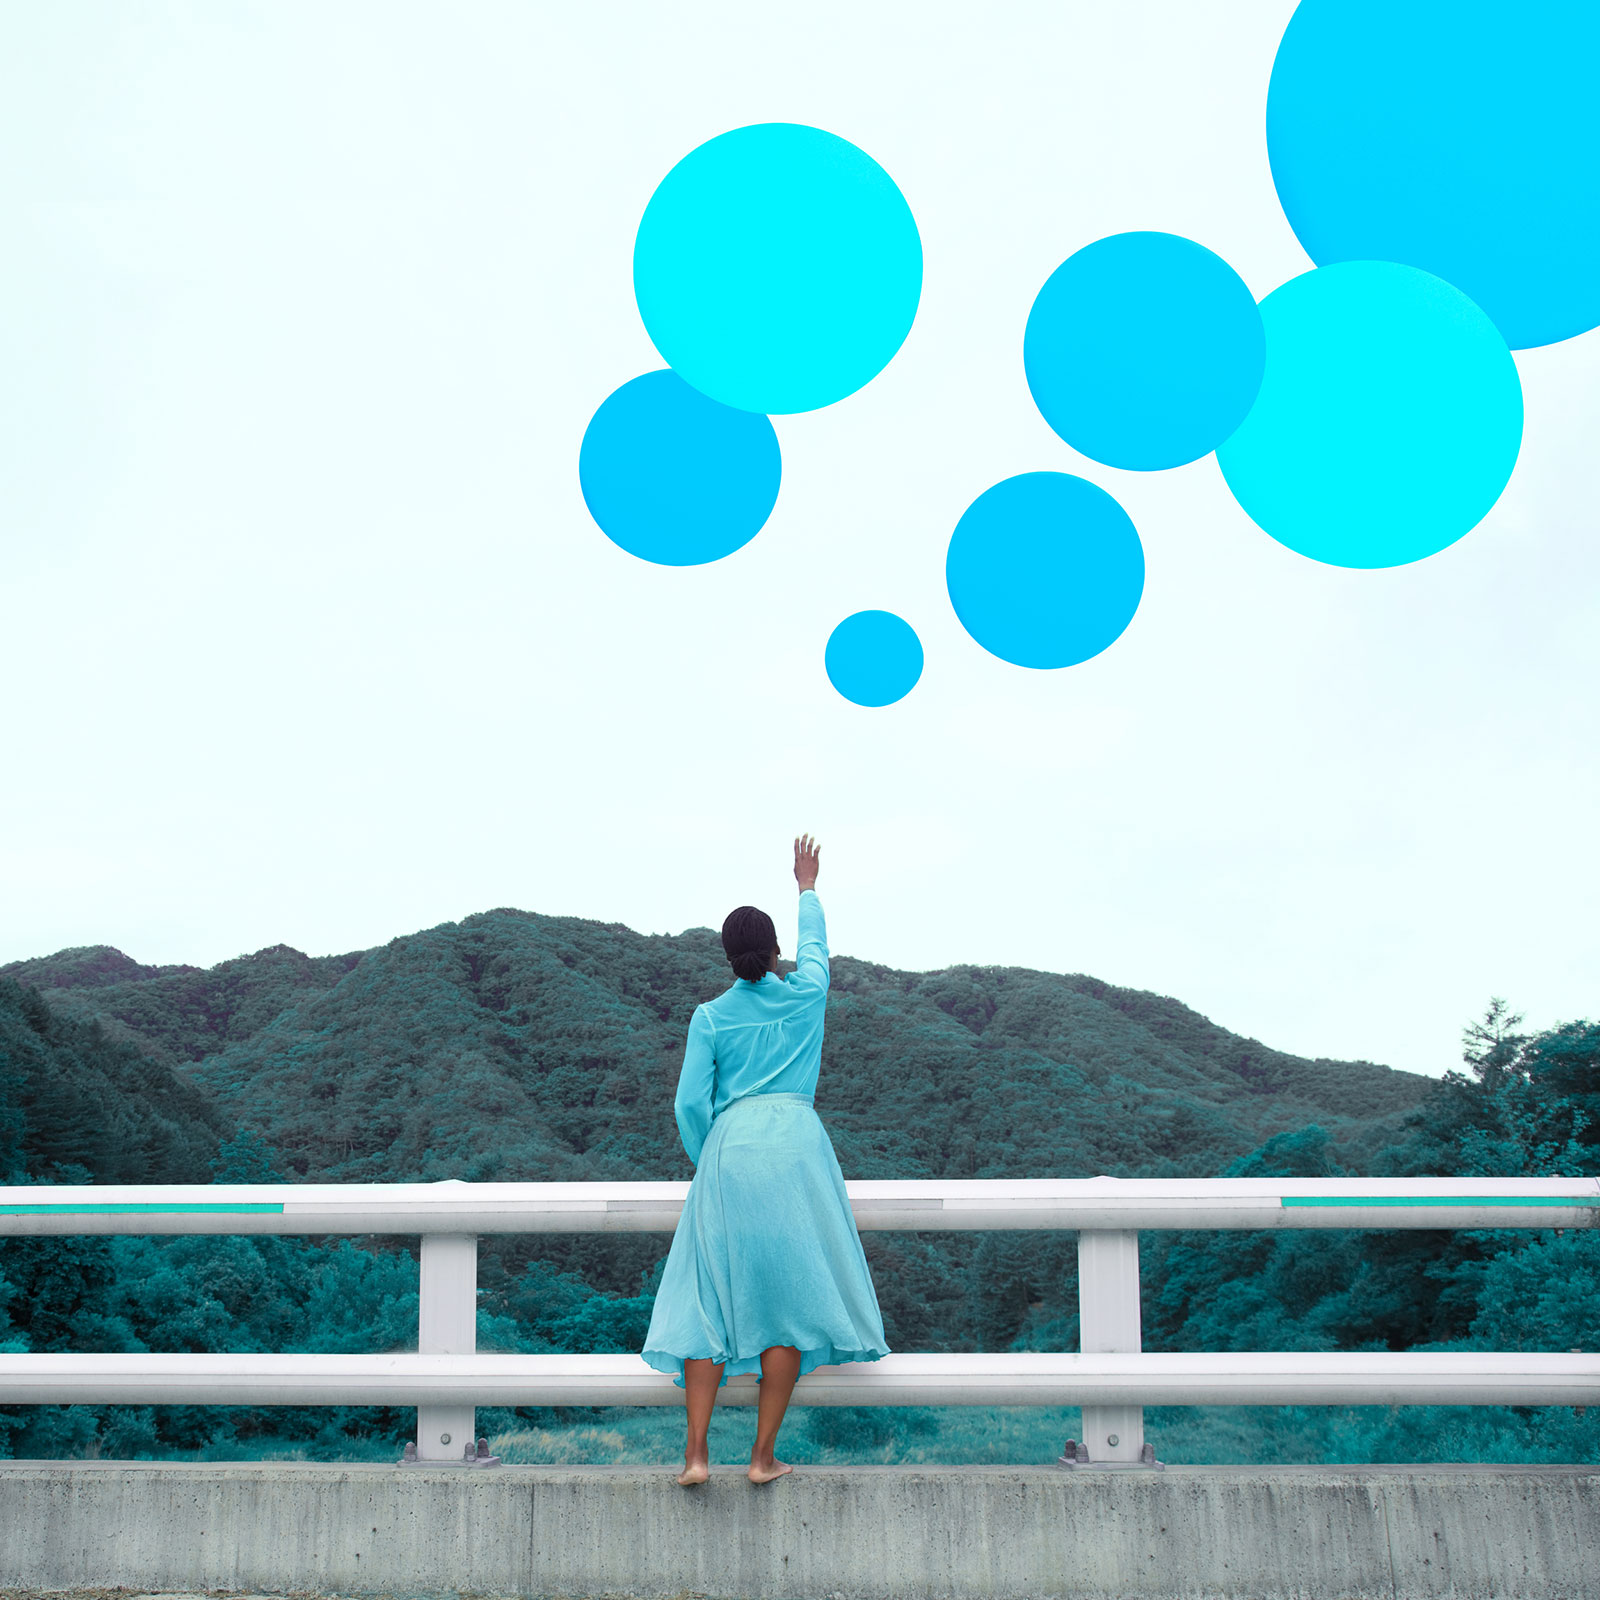 Woman reaching up to the sky, towards bright blue balloons